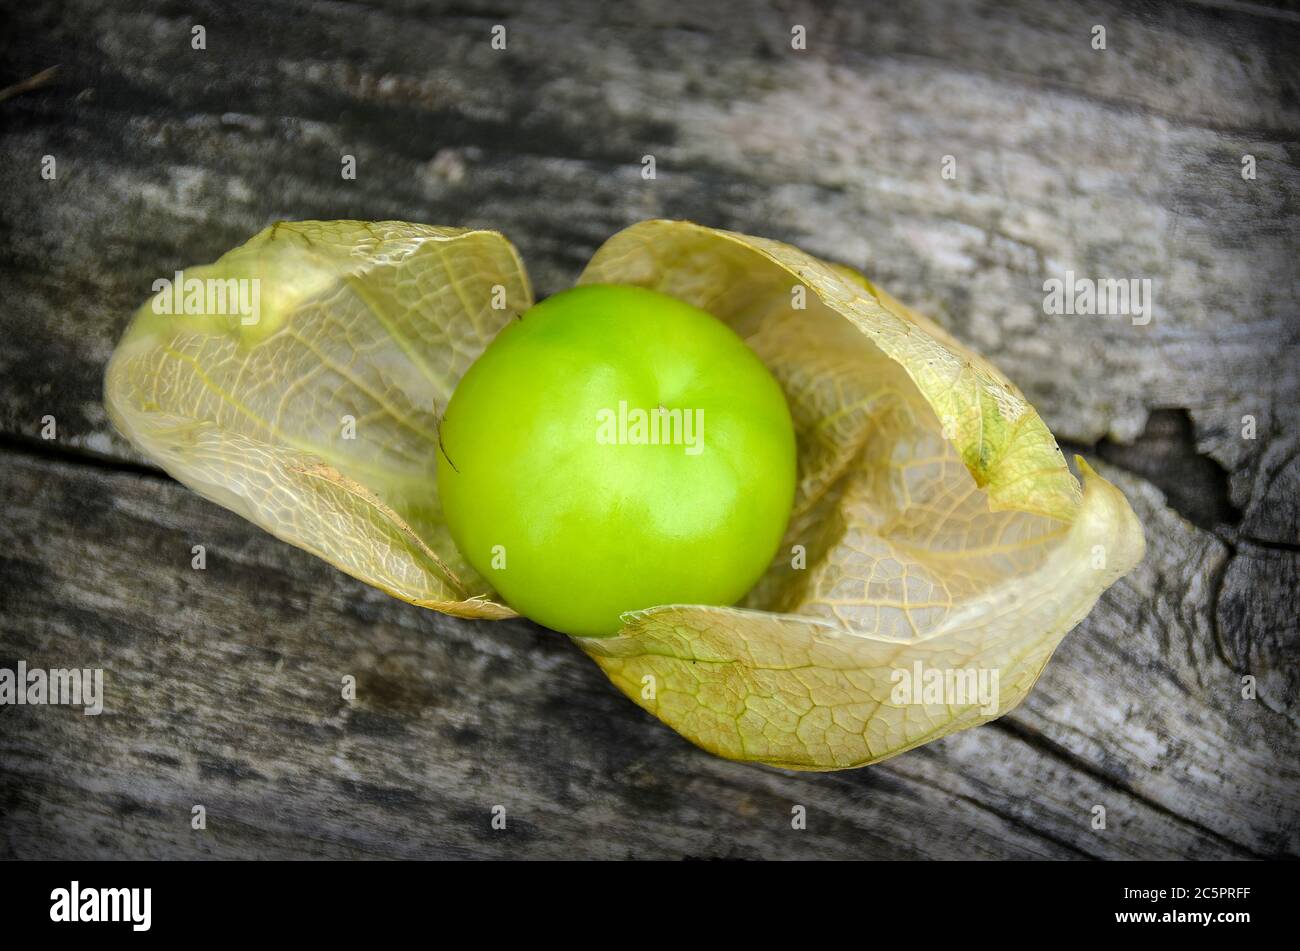 stilllife of a fruit of the plant Tomatillo with husk on old wood Stock Photo